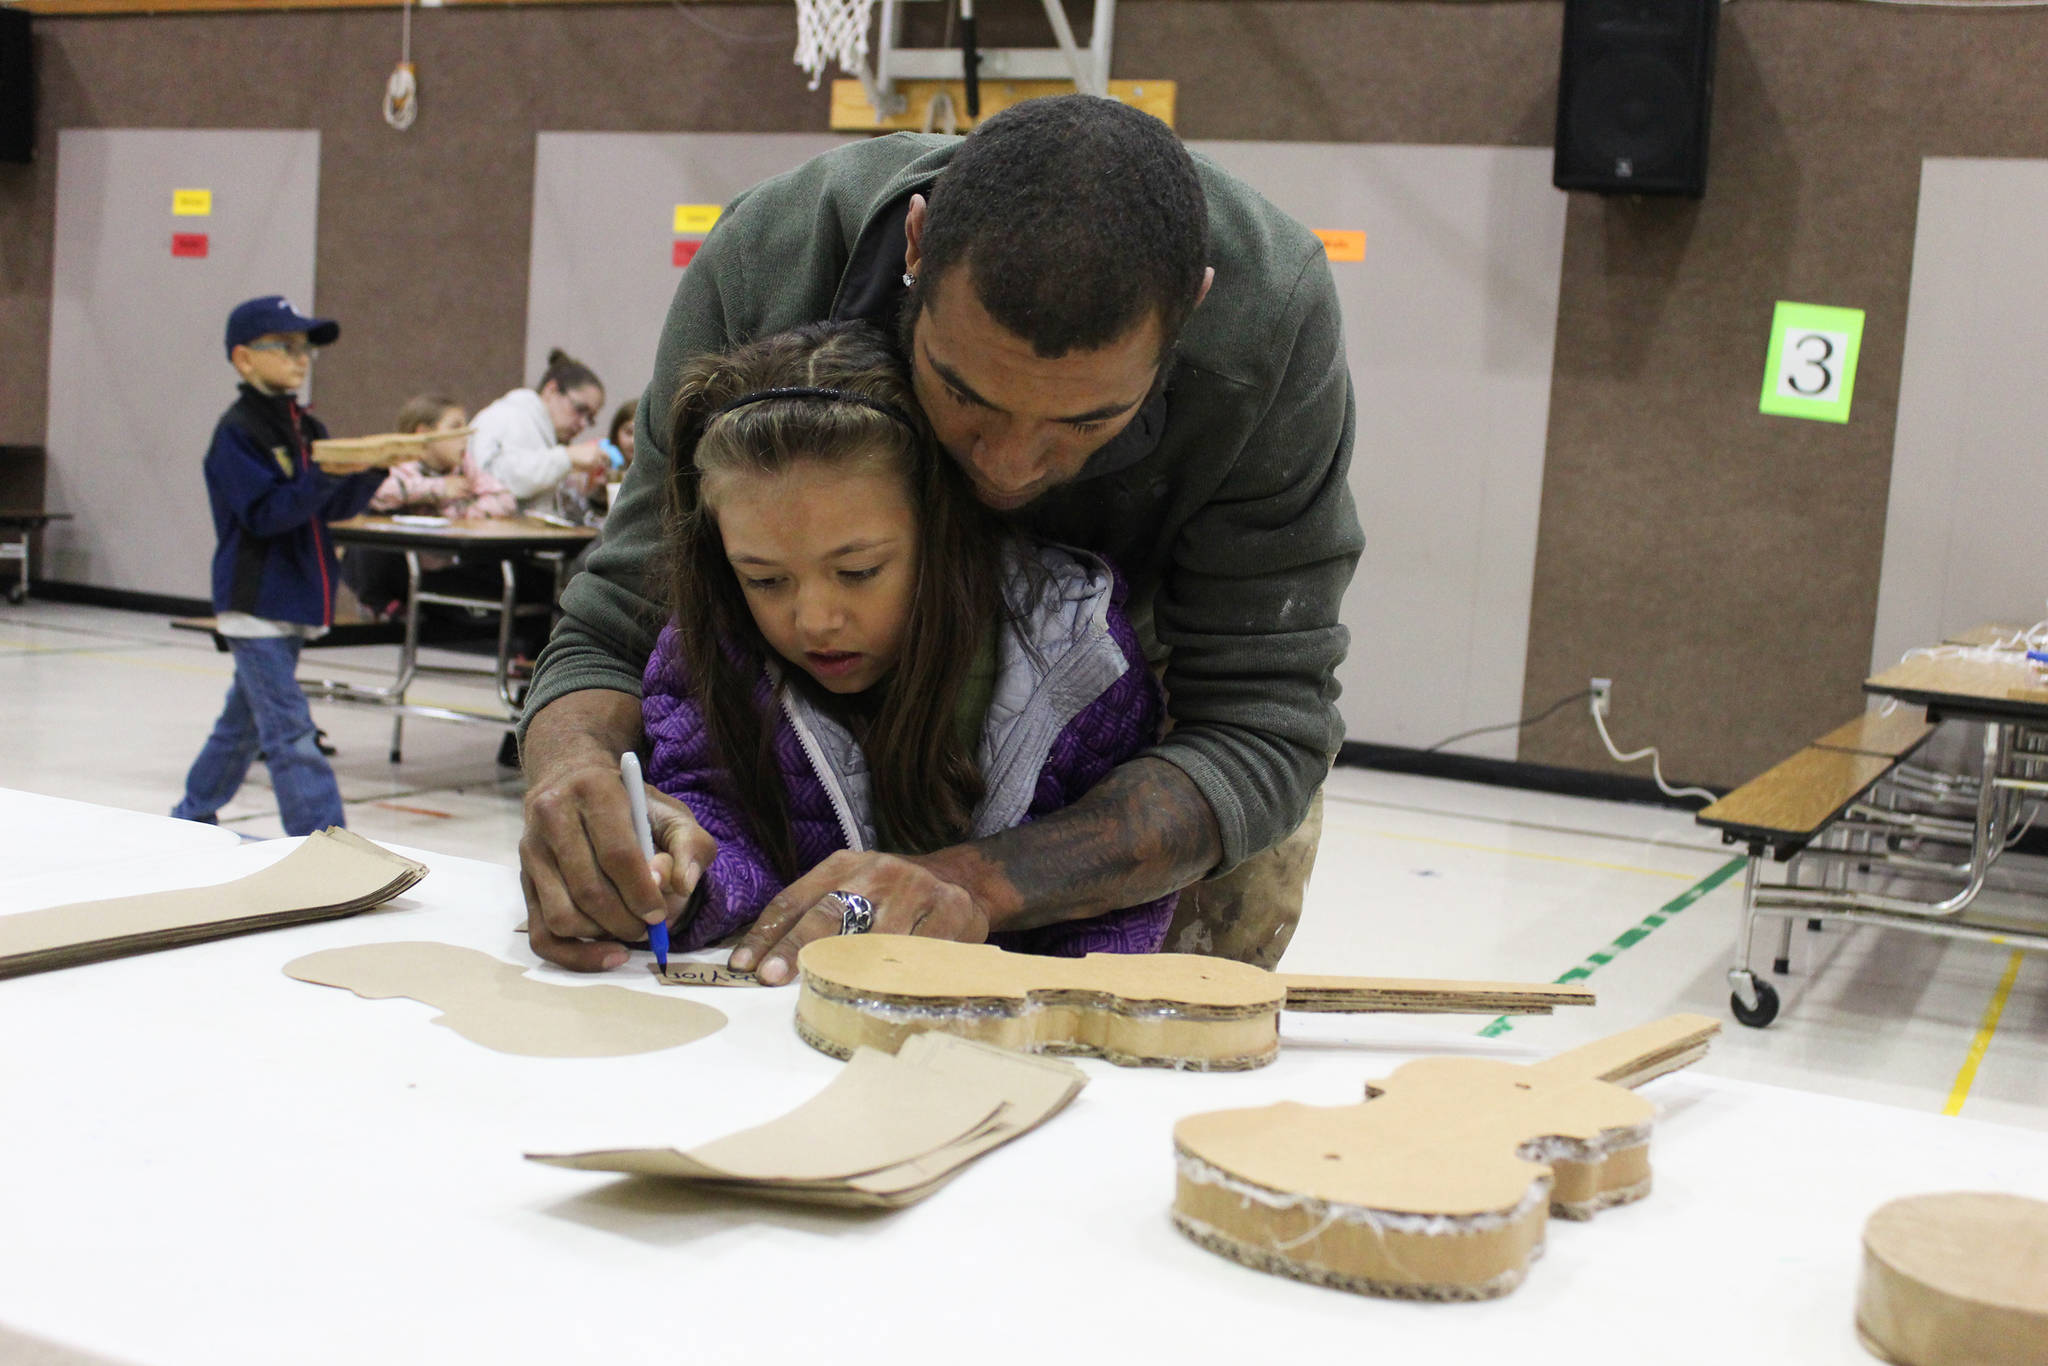 Alonzo Lang helps his 5-year-old daughter, Payton, create a violin out of cardboard during a craft night at Paul Bank Elementary School on Thursday, Sept. 6, 2018 at the school in Homer, Alaska. The project is part of the school’s Preludes Violin Program, which teaches first and second grade students musicianship and the host of skills that come with it. Students start out with the cardboard violins before graduating to the real instruments later in the year. (Photo by Megan Pacer/Homer News)